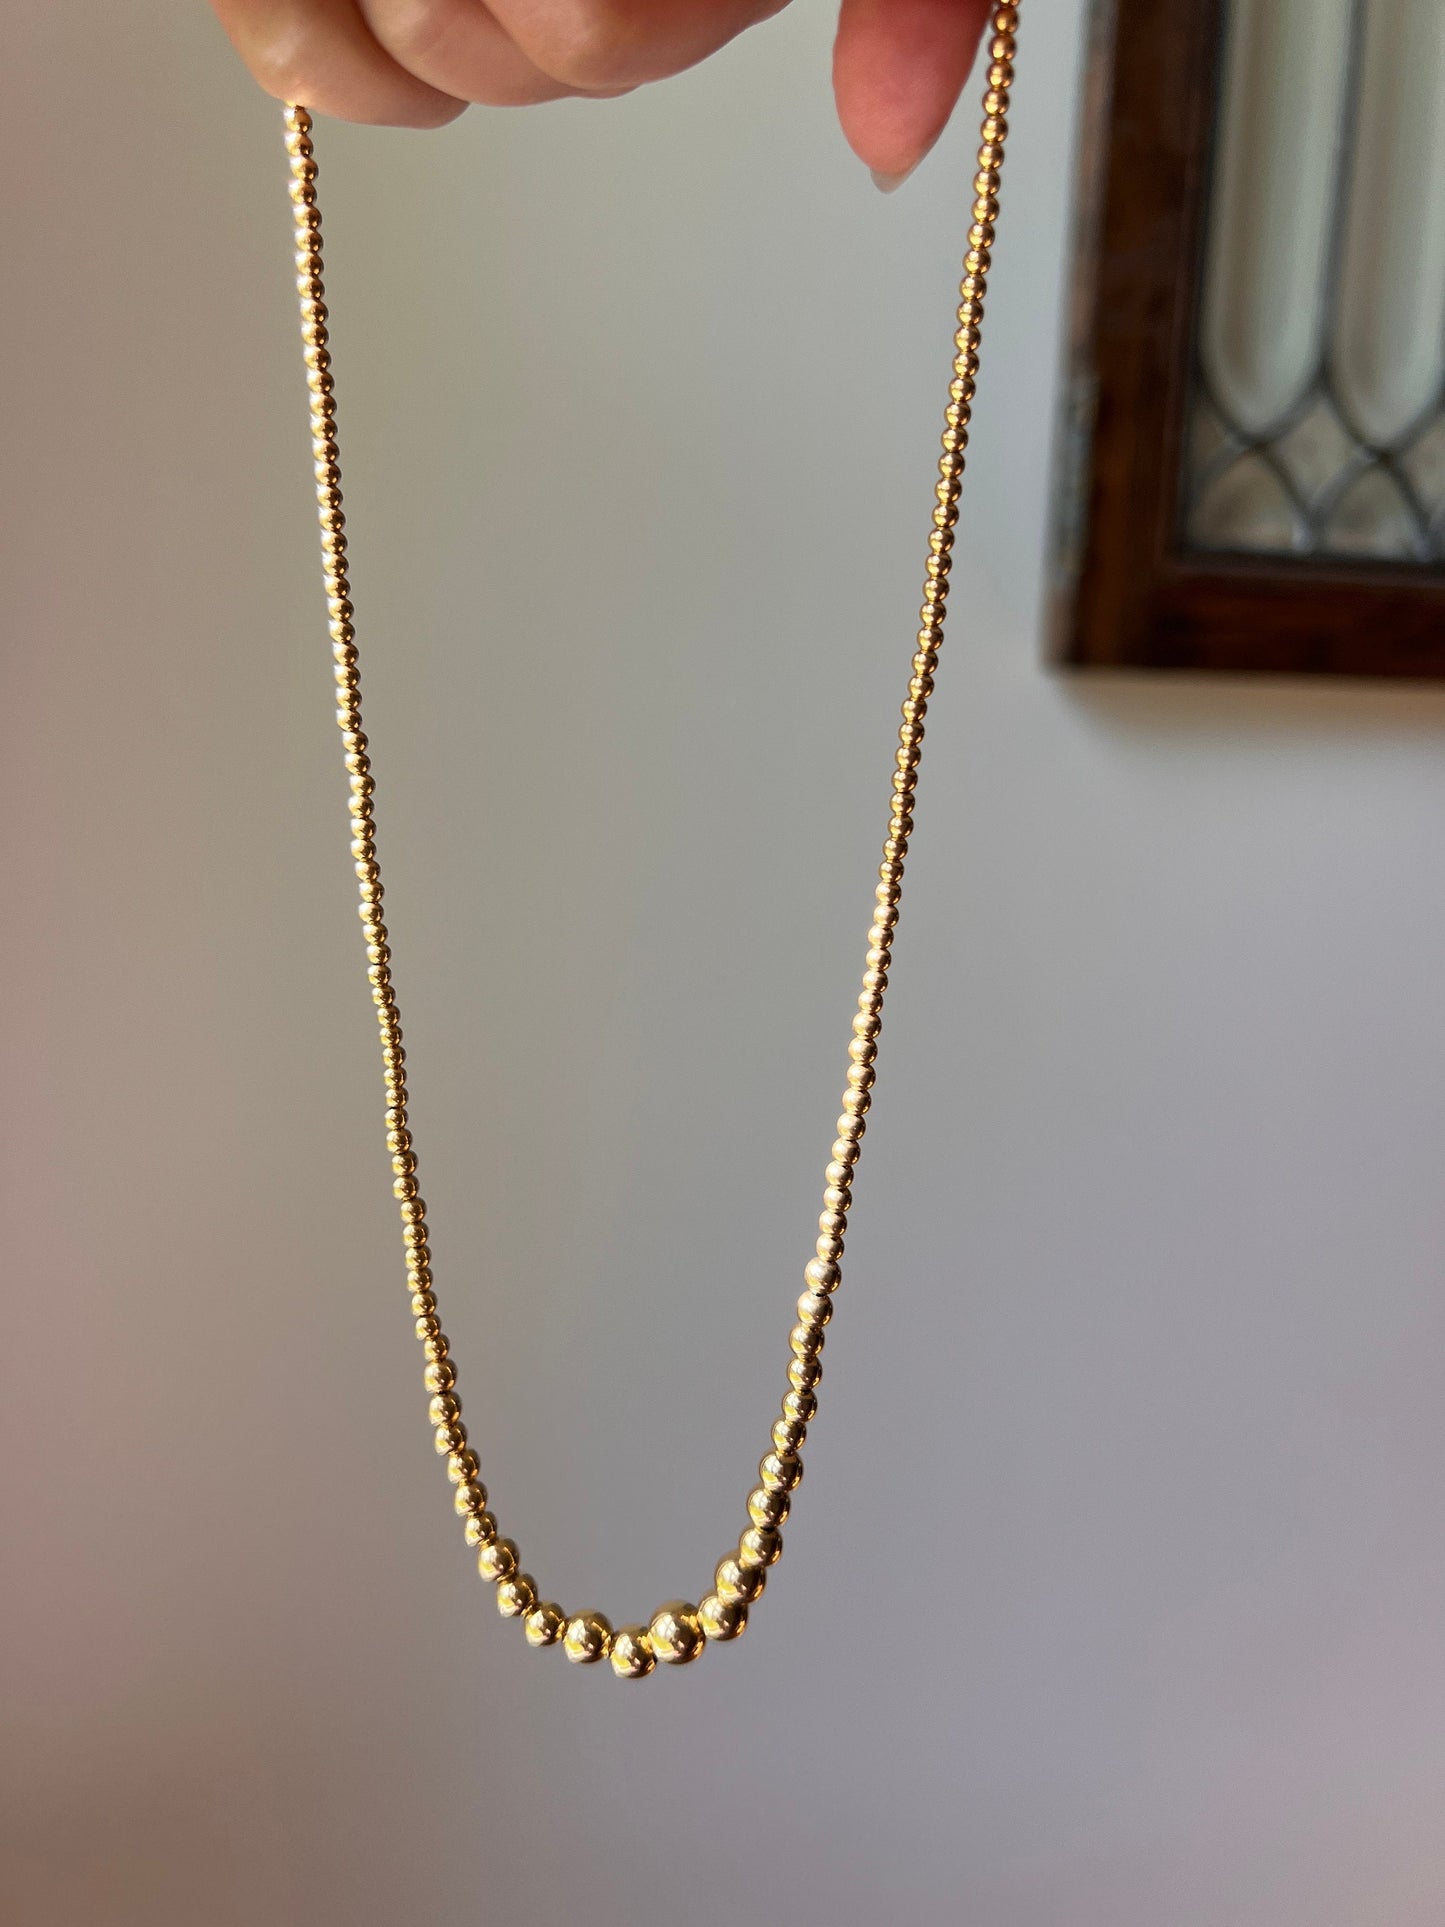 French VINTAGE 6g 18k GOLD Solid 17.5" Traditional Marseille Necklace Grain of Gold Graduated Beads Choker Collar Chain Neckmess Love Gift